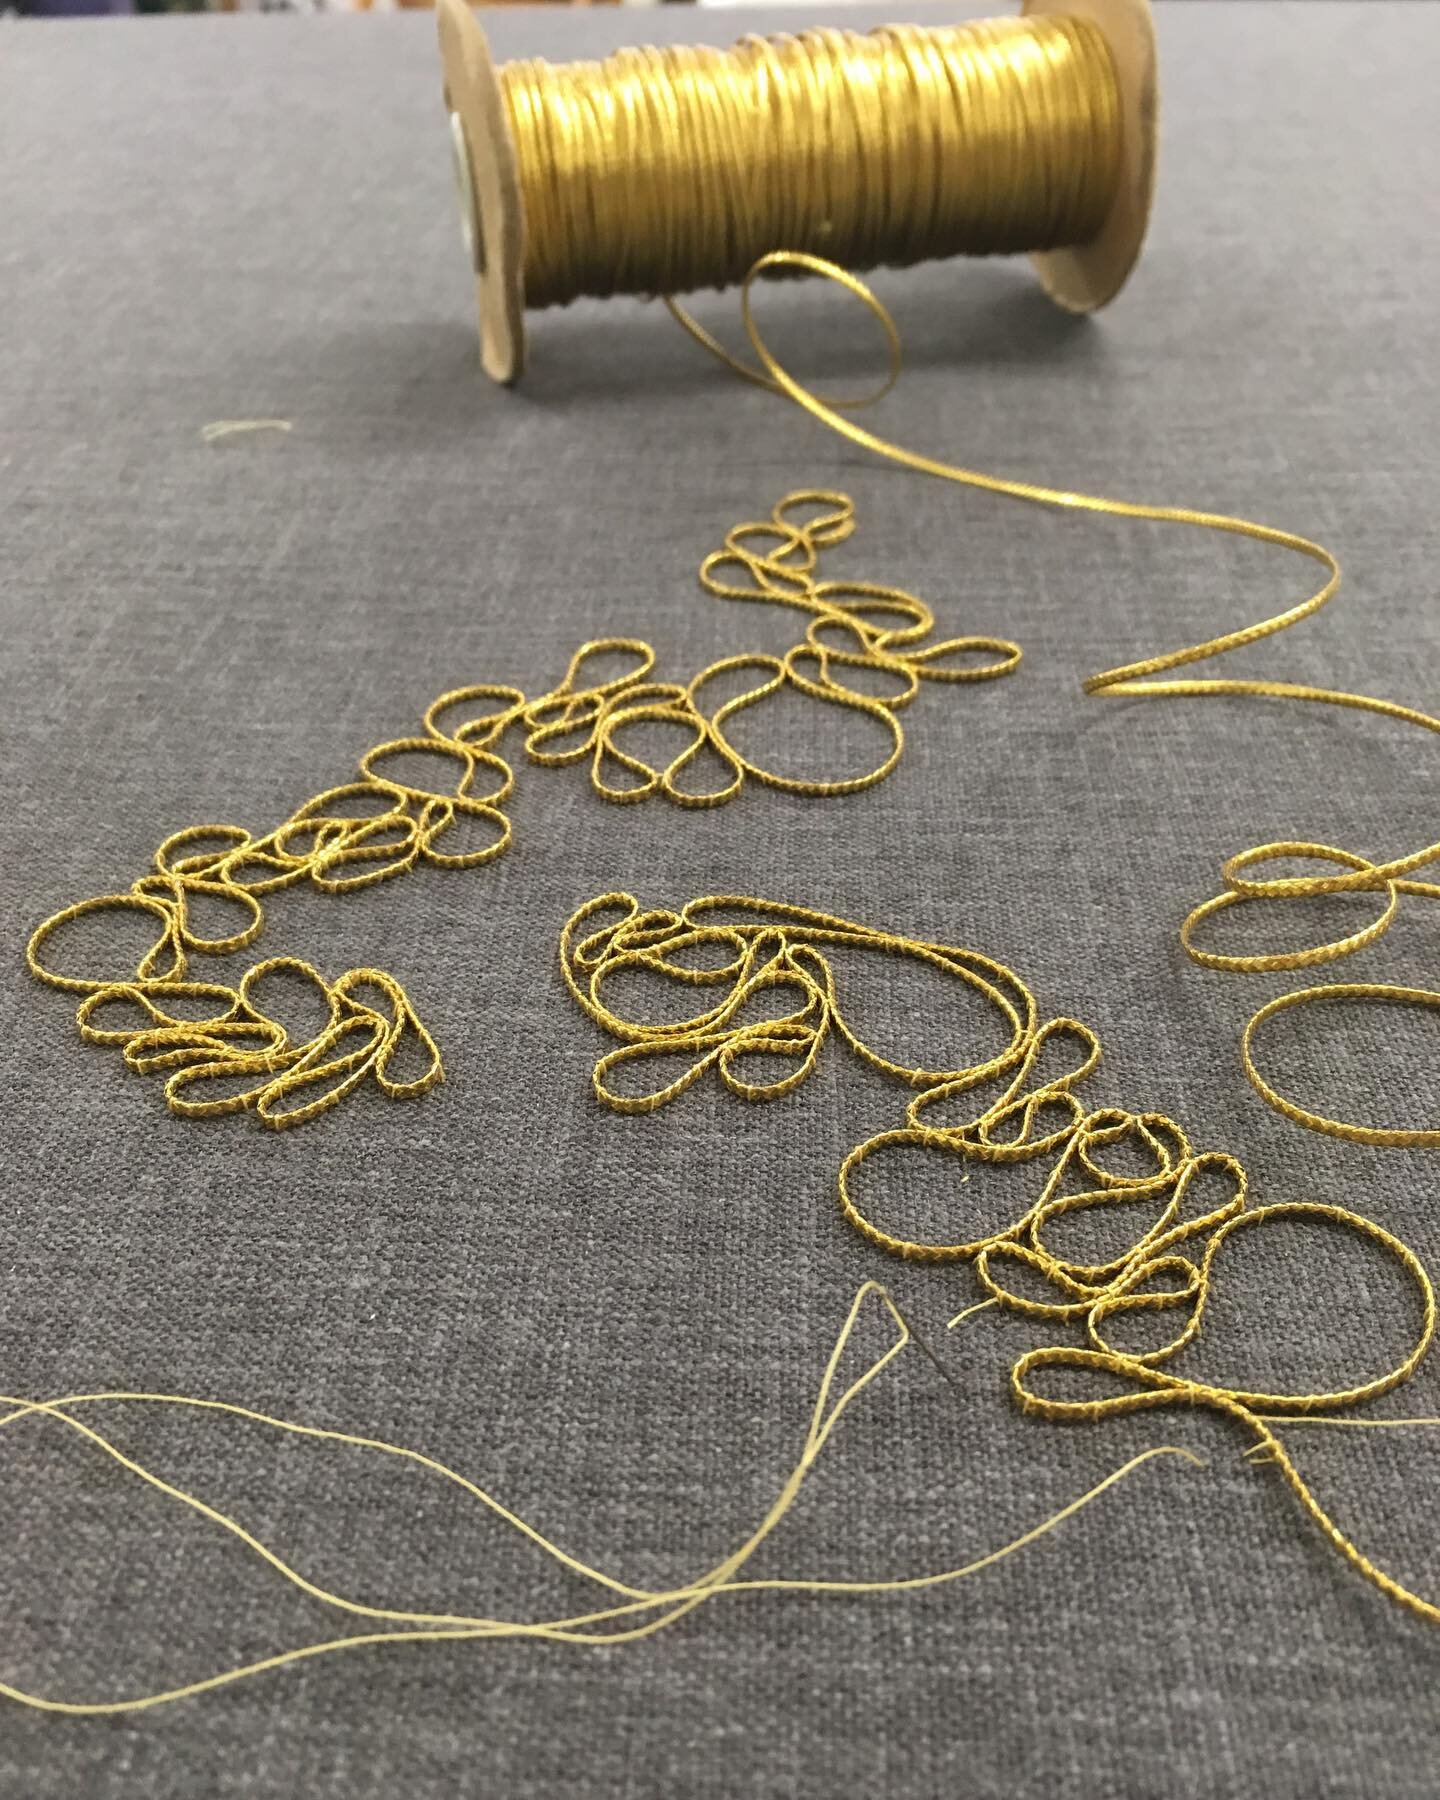 FLOW: Playful Goldwork Couching ✨🧵
⠀⠀⠀⠀⠀⠀⠀⠀⠀
This month long course will show you how to go from the foundations of the much loved technique of couching stitch to working with metal threads in an intuitive, playful way, celebrating the beauty of gol